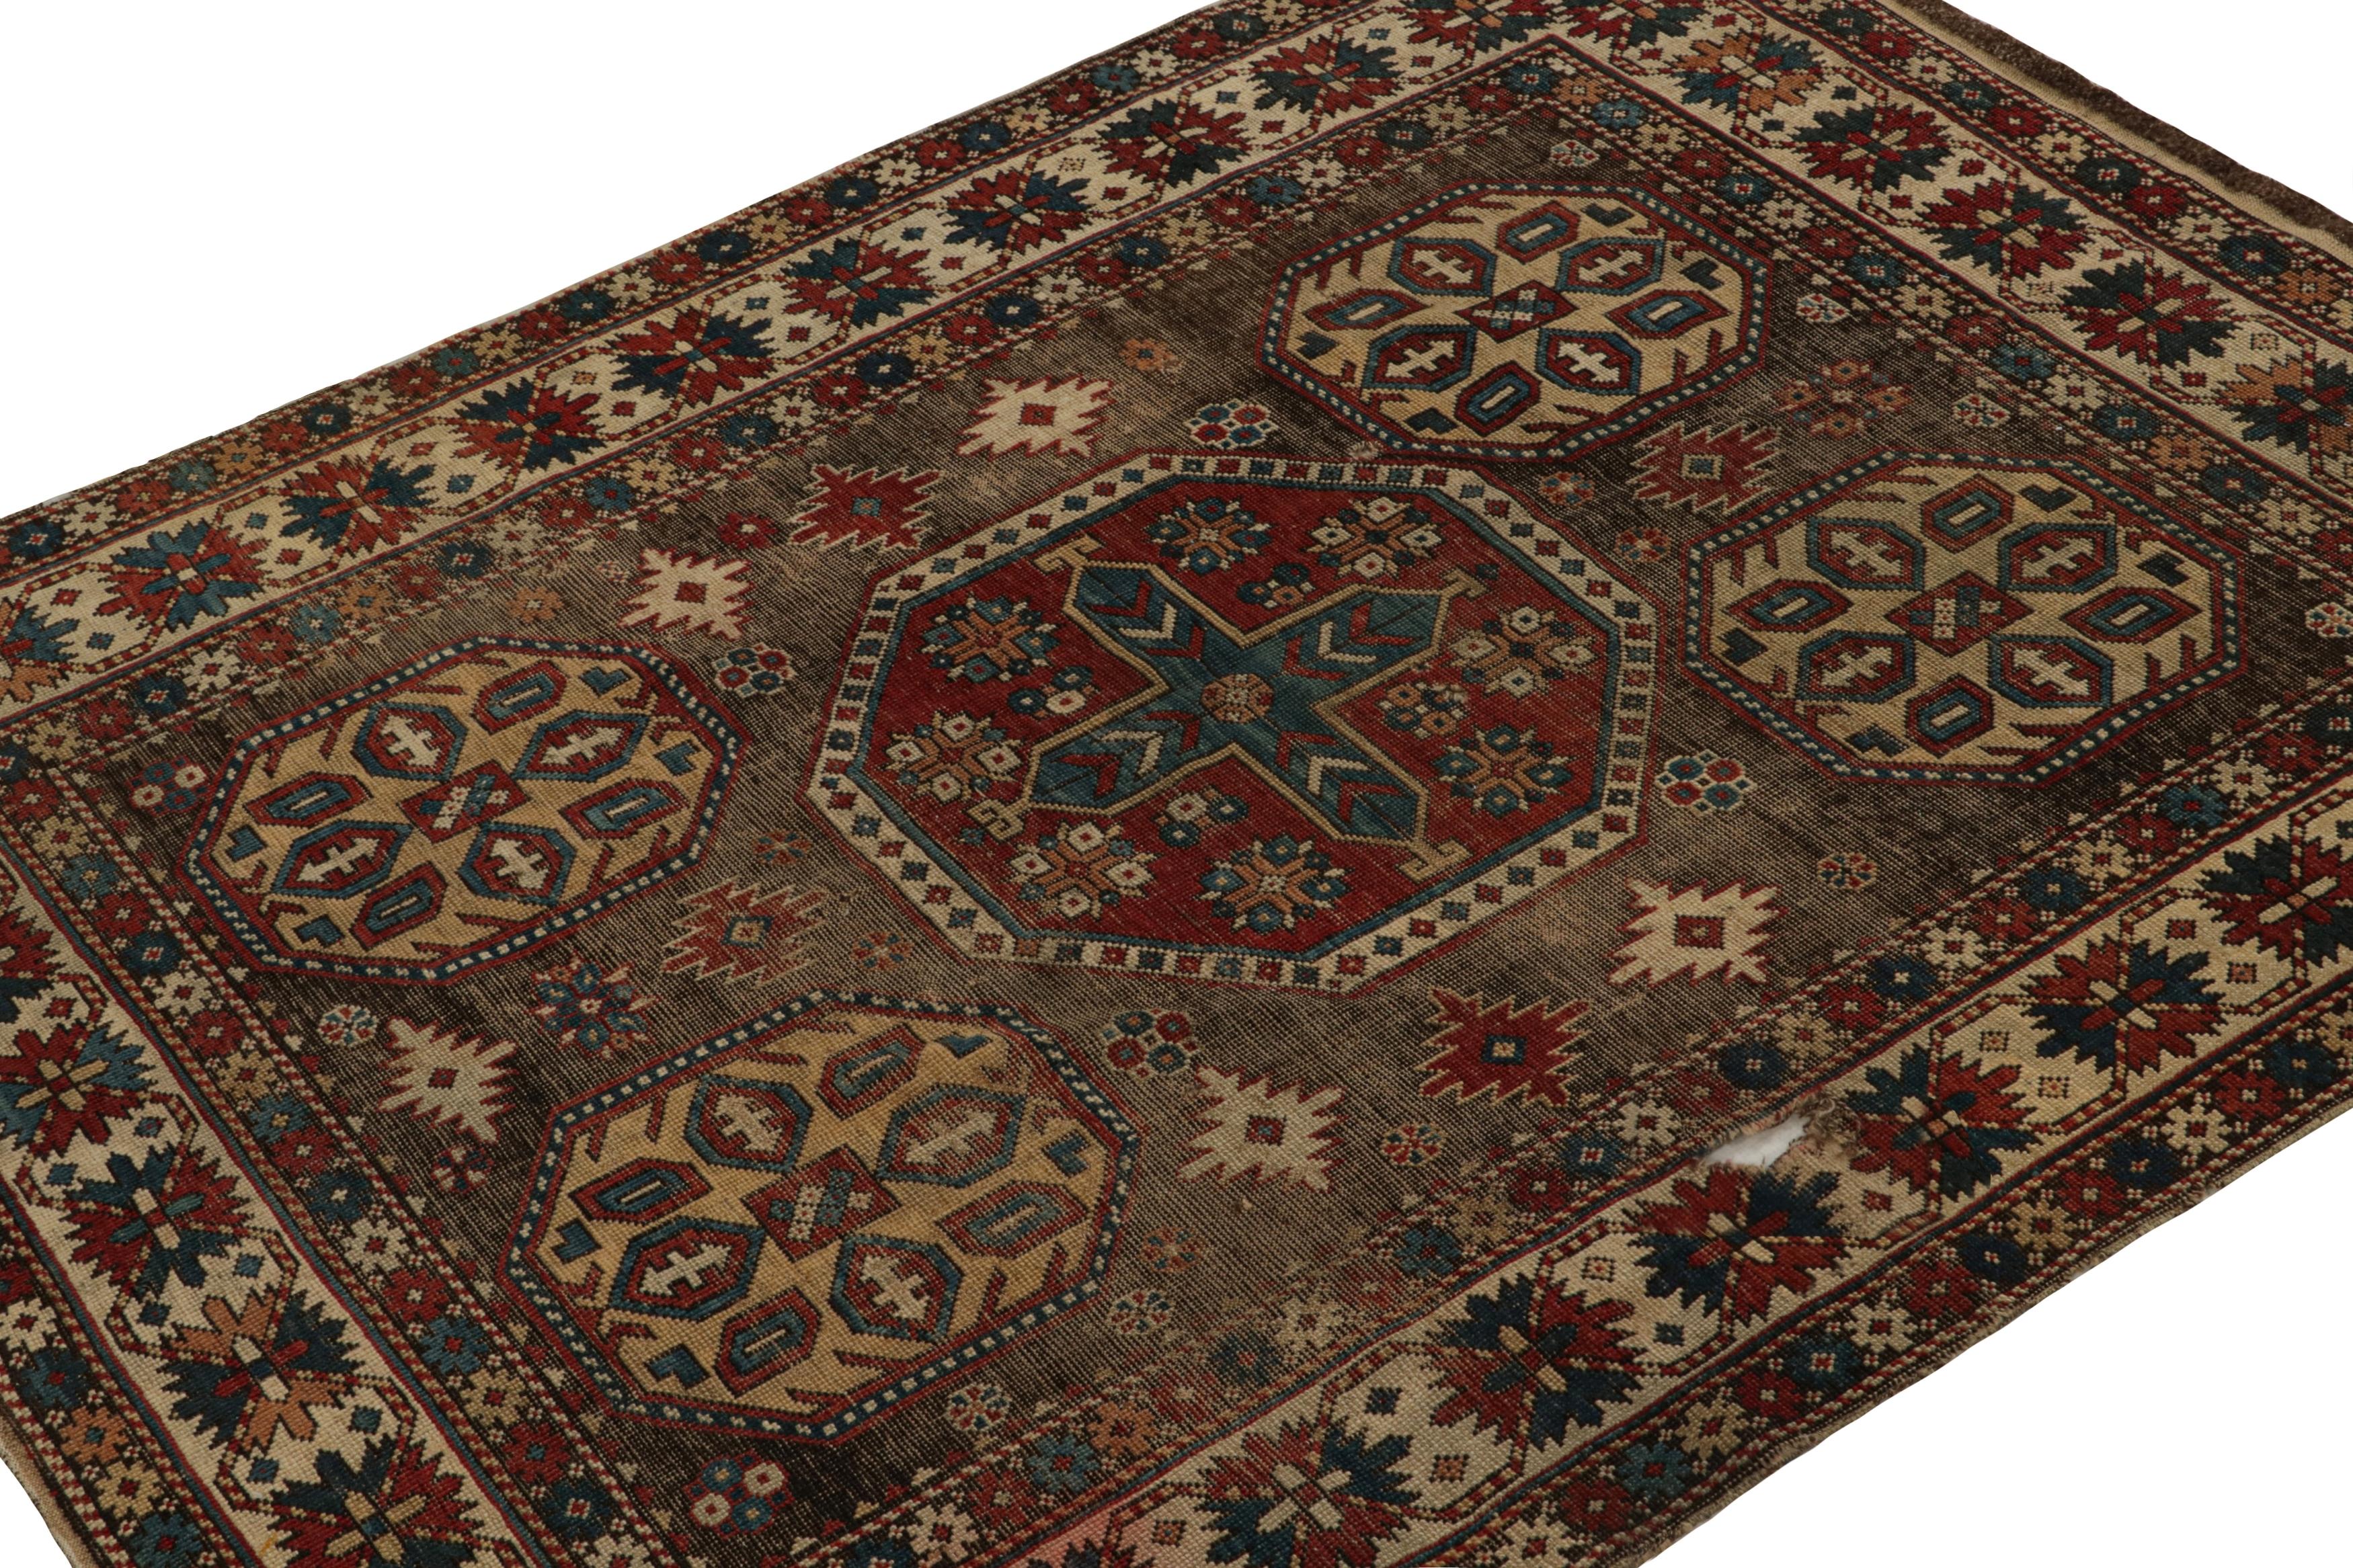 Hand-knotted in wool, this 4x5 Antique tribal Kazak rug is believed to originate from turn-of-the-century Russia. An exciting new curation from Rug & Kilim, its design favors a primitivist style with large geometric patterns in red, blue and